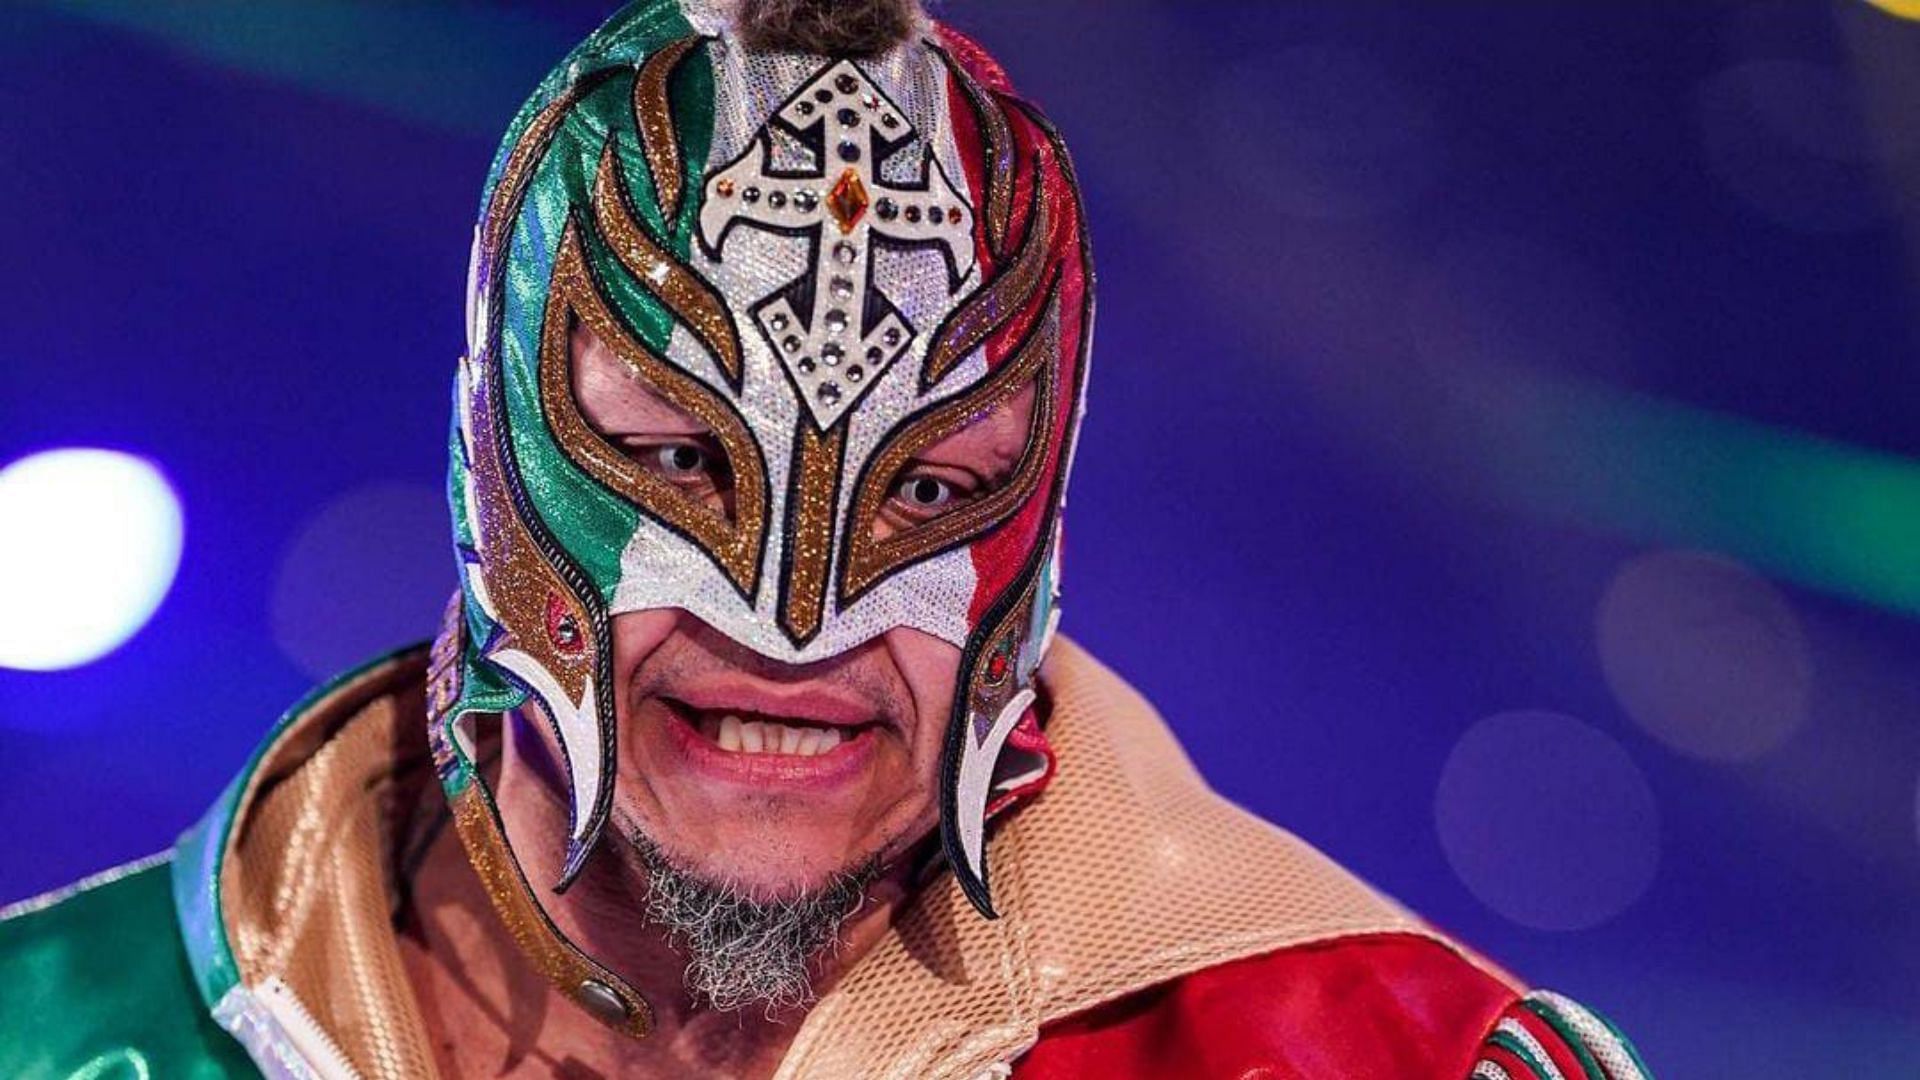 Rey Mysterio is a WWE Hall of Famer